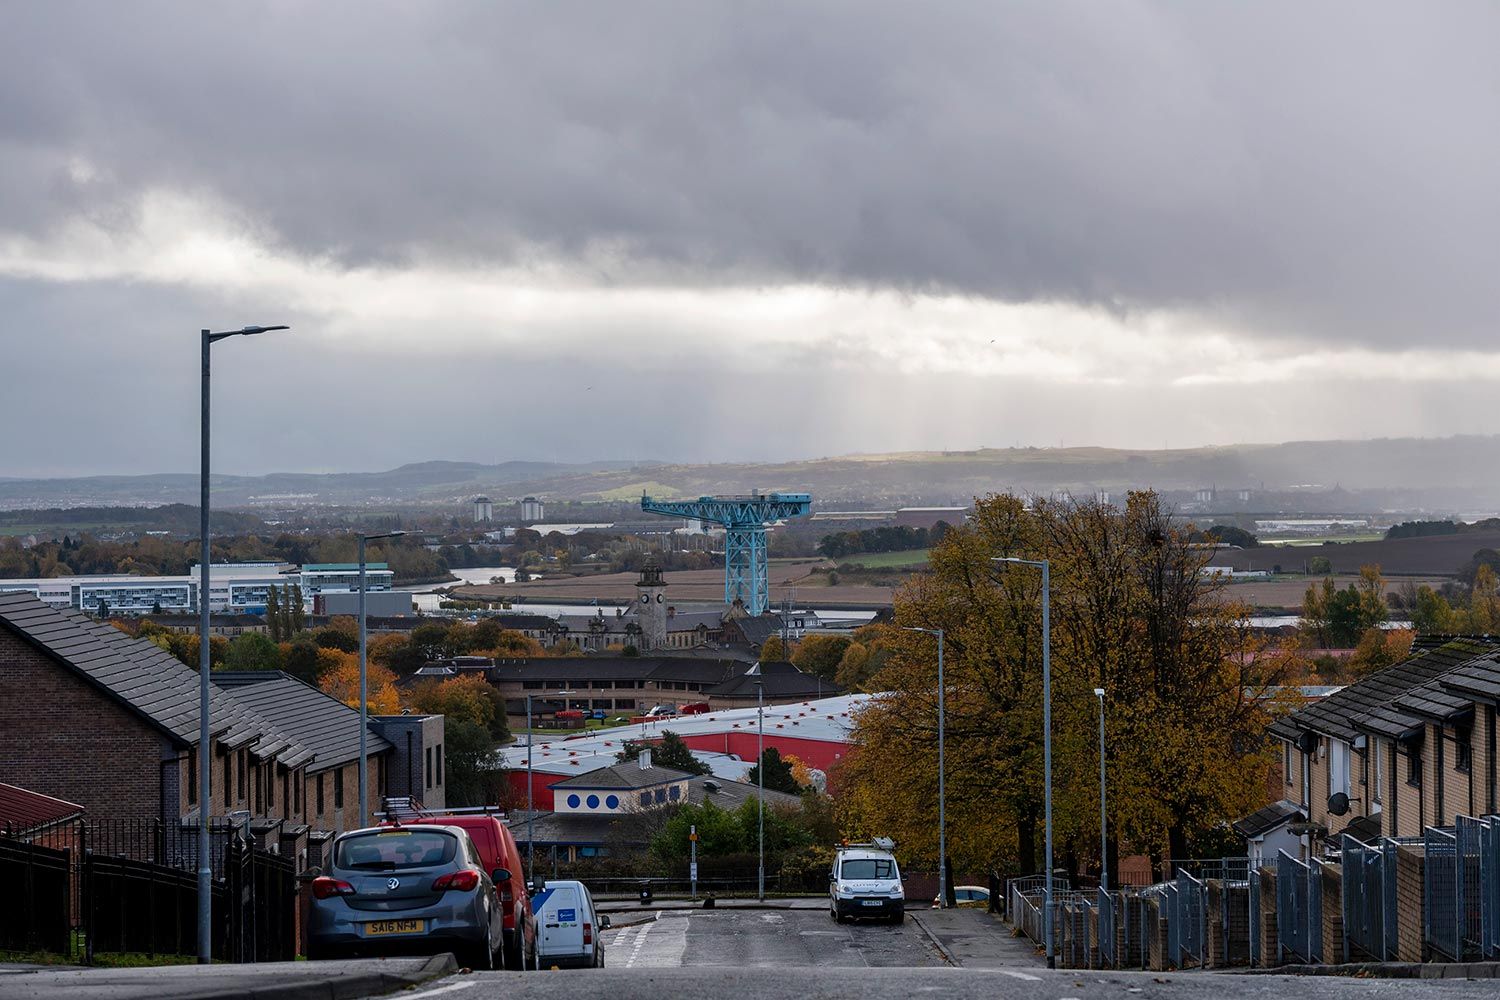 A giant blue crane known as “The Titan” hangs over the edge of town, in Clydebank, West Dunbartonshire, Scotland. Image by Michael Santiago. United Kingdom, 2019.